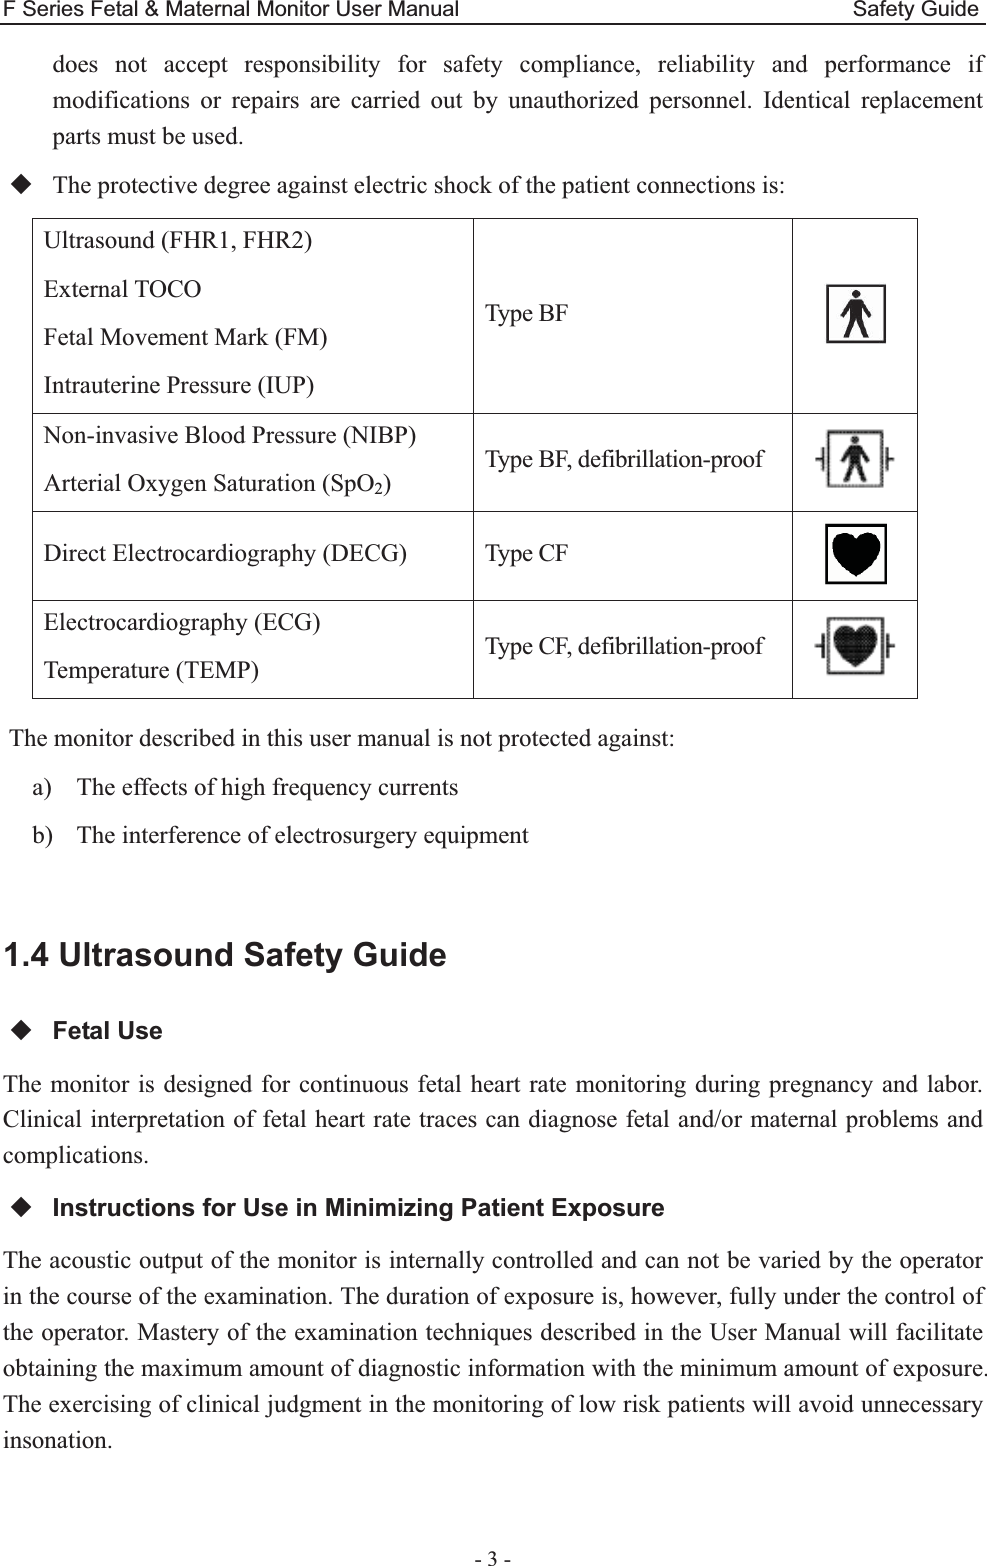 F Series Fetal &amp; Maternal Monitor User Manual                                    Safety Guide - 3 - does not accept responsibility for safety compliance, reliability and performance if modifications or repairs are carried out by unauthorized personnel. Identical replacement parts must be used.  The protective degree against electric shock of the patient connections is: Ultrasound (FHR1, FHR2) External TOCO Fetal Movement Mark (FM) Intrauterine Pressure (IUP) Type BF   Non-invasive Blood Pressure (NIBP) Arterial Oxygen Saturation (SpO2) Type BF, defibrillation-proof  Direct Electrocardiography (DECG)  Type CF  Electrocardiography (ECG) Temperature (TEMP) Type CF, defibrillation-proof   The monitor described in this user manual is not protected against: a) The effects of high frequency currents b) The interference of electrosurgery equipment  1.4 Ultrasound Safety Guide  Fetal Use The monitor is designed for continuous fetal heart rate monitoring during pregnancy and labor. Clinical interpretation of fetal heart rate traces can diagnose fetal and/or maternal problems and complications.  Instructions for Use in Minimizing Patient Exposure The acoustic output of the monitor is internally controlled and can not be varied by the operator in the course of the examination. The duration of exposure is, however, fully under the control of the operator. Mastery of the examination techniques described in the User Manual will facilitate obtaining the maximum amount of diagnostic information with the minimum amount of exposure. The exercising of clinical judgment in the monitoring of low risk patients will avoid unnecessary insonation. 